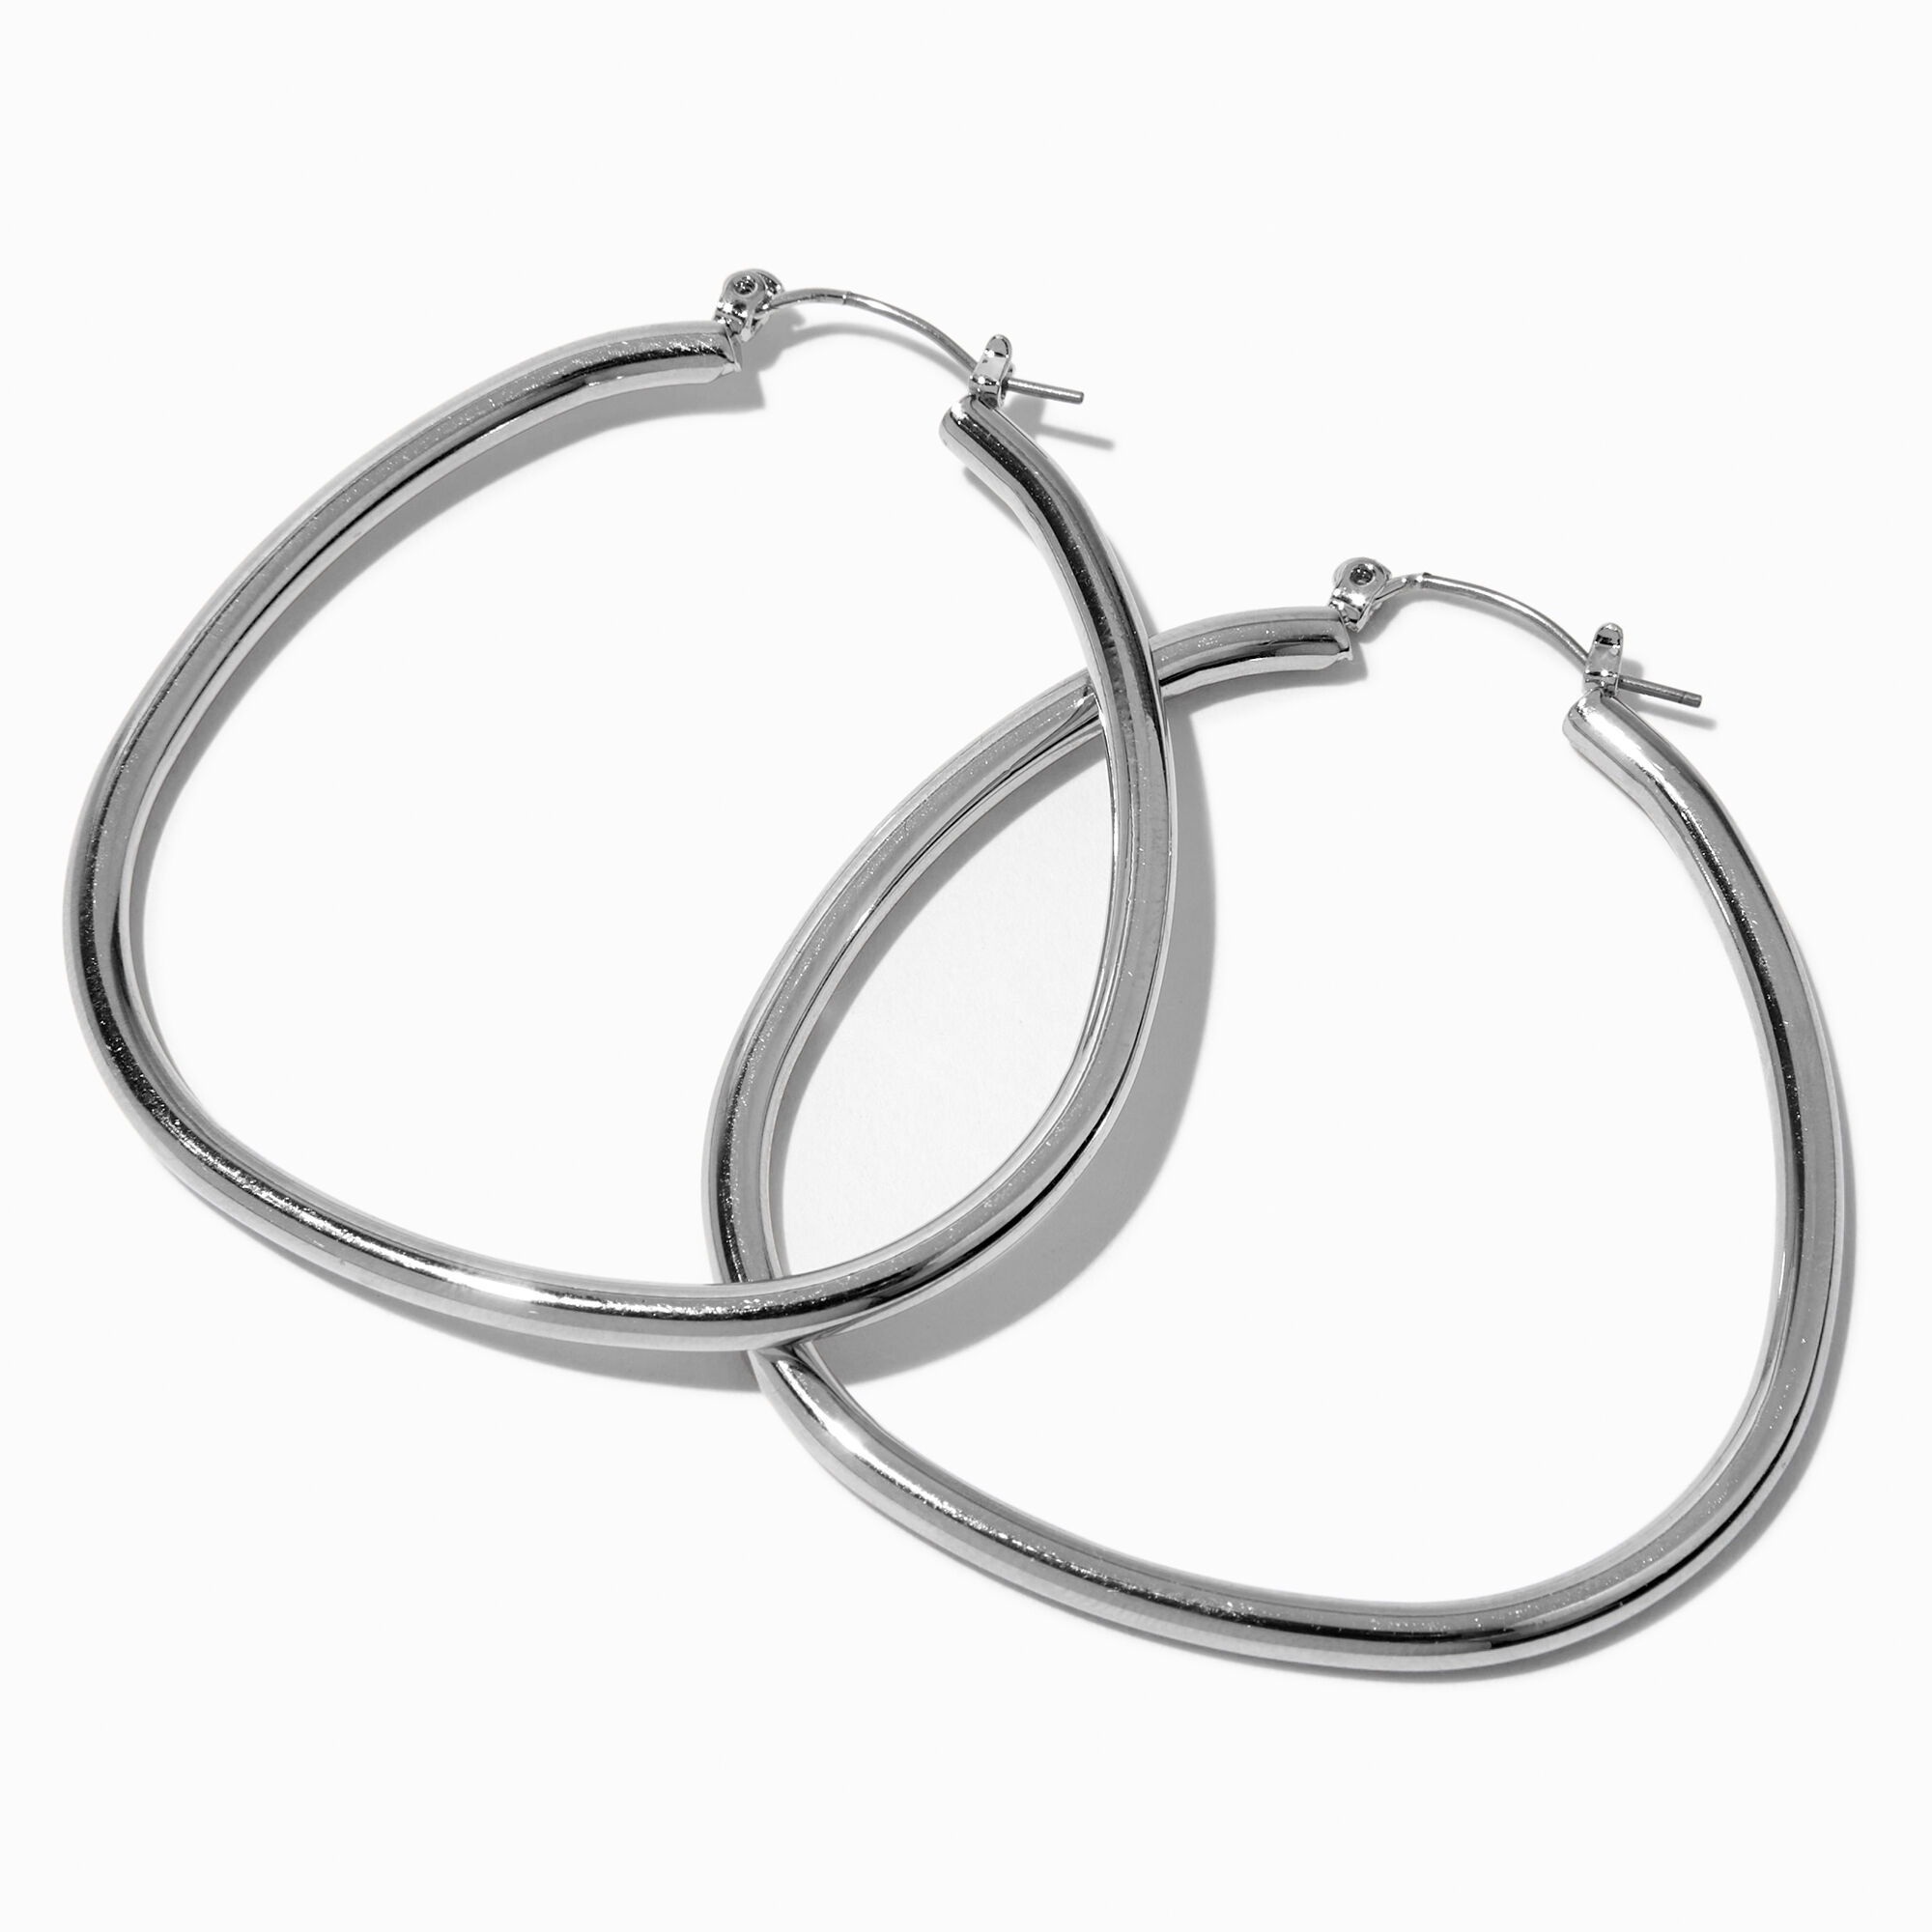 View Claires Oval 50MM Hoop Earrings Silver information